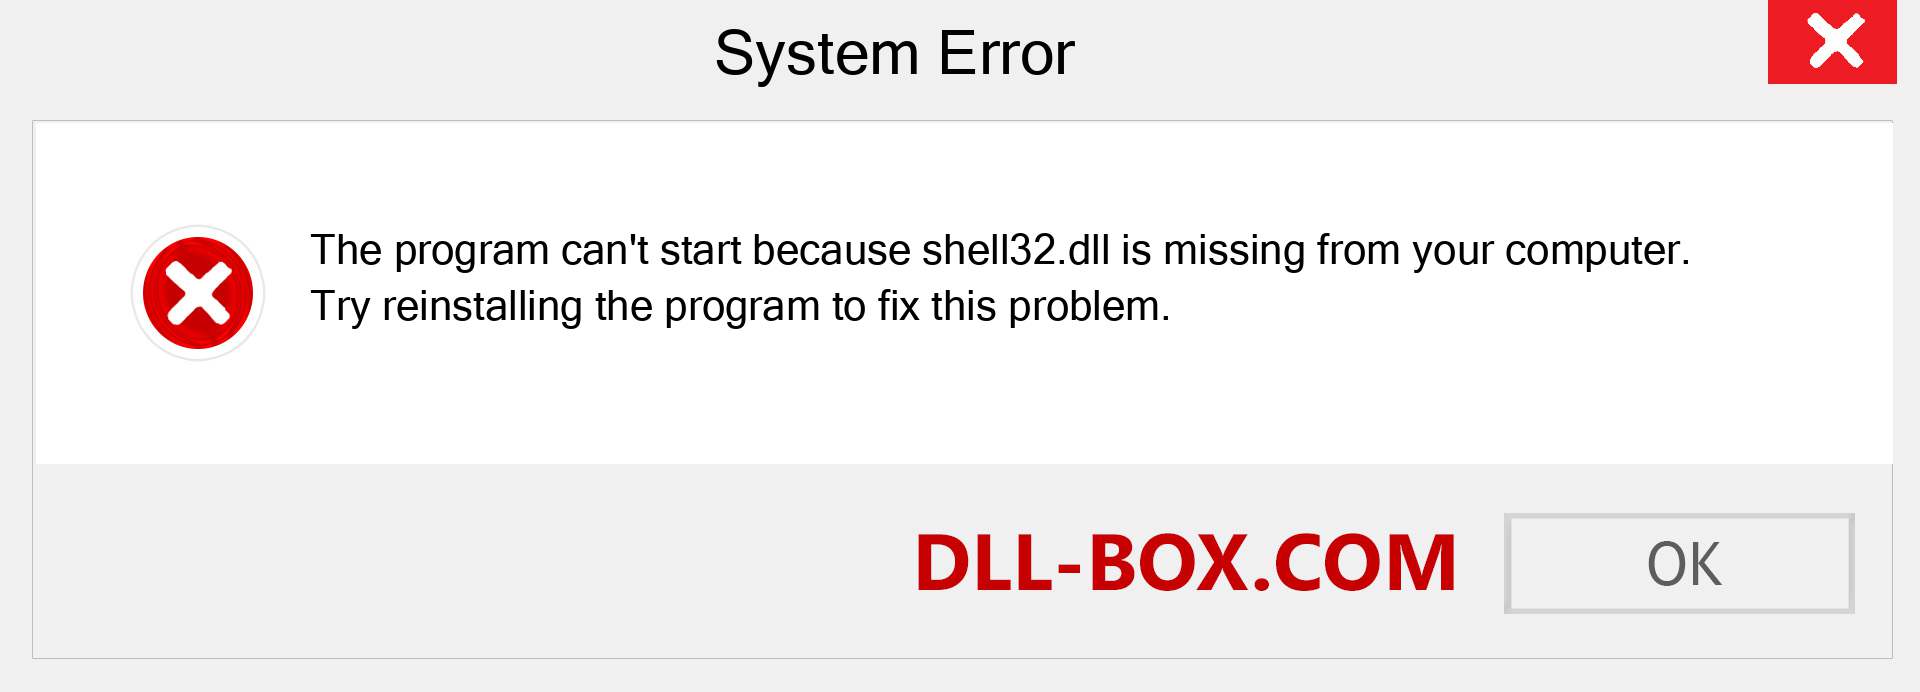  shell32.dll file is missing?. Download for Windows 7, 8, 10 - Fix  shell32 dll Missing Error on Windows, photos, images